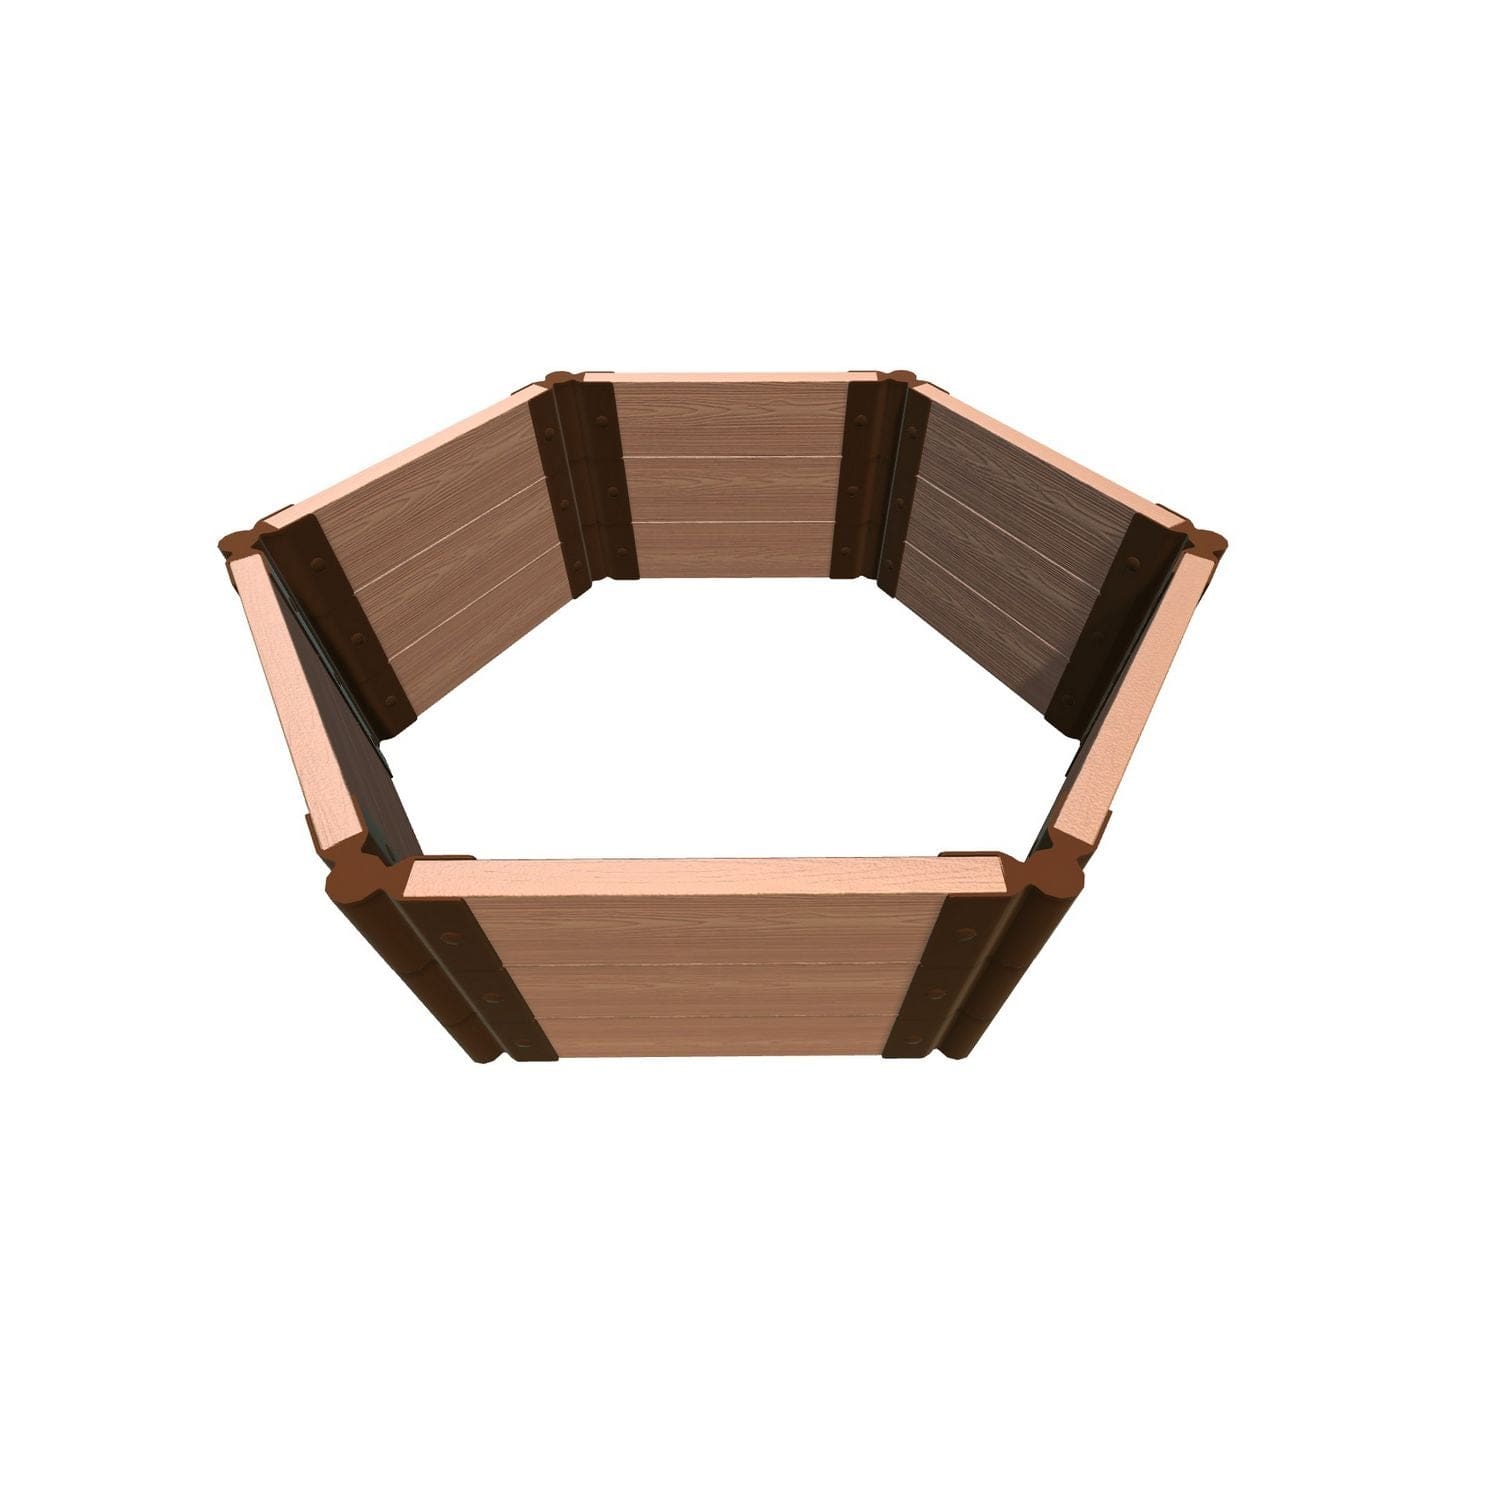 Frame It All Gardening Accessories 2" Frame It All | Tool-Free Fort Jefferson Raised Garden Bed (Hexagon) 4' X 4' X 16.5" - Classic Sienna 200003470